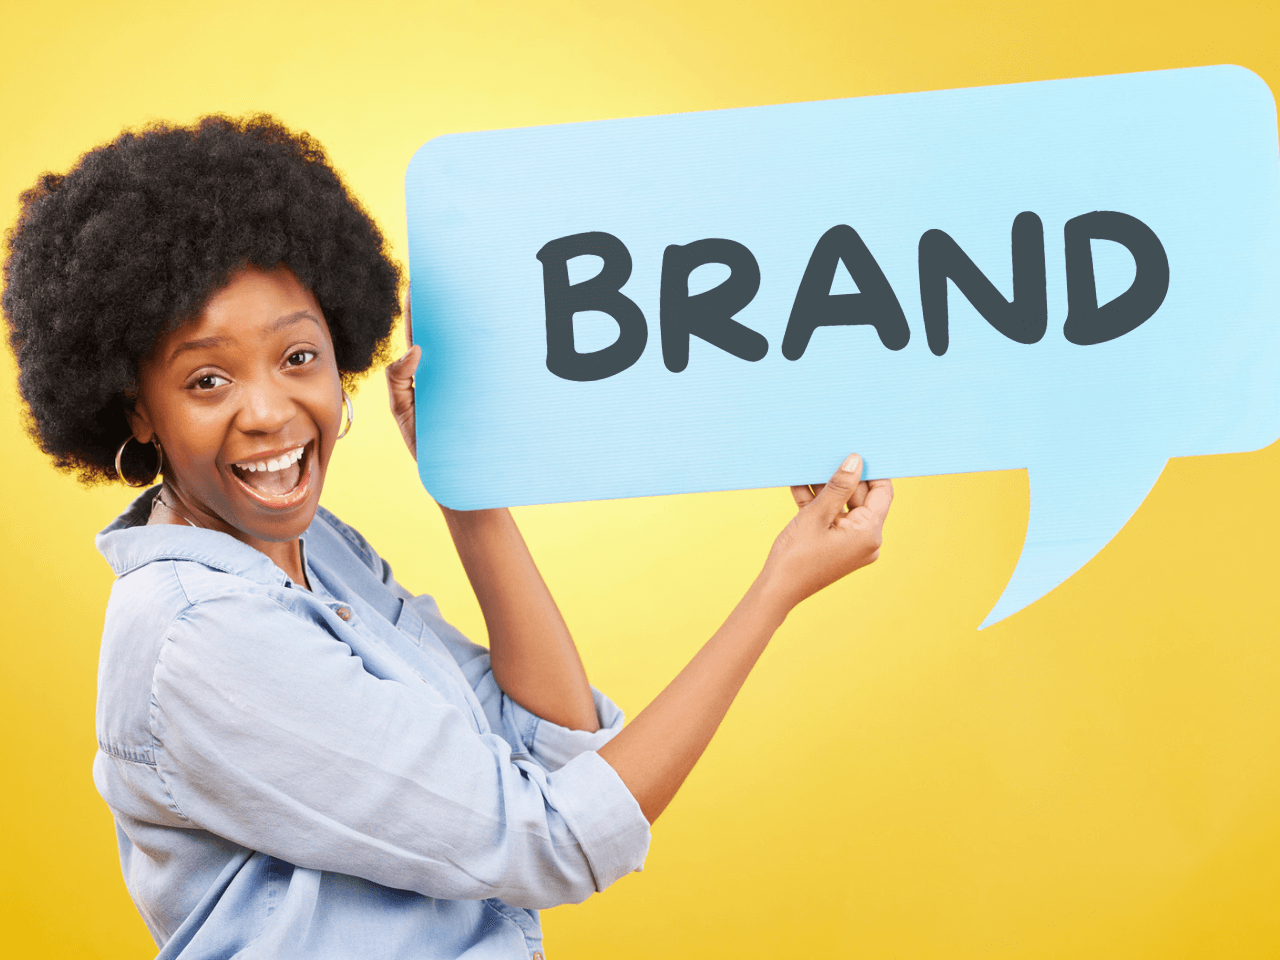 Permalink to: Job seekers: how to build your brand to get the job